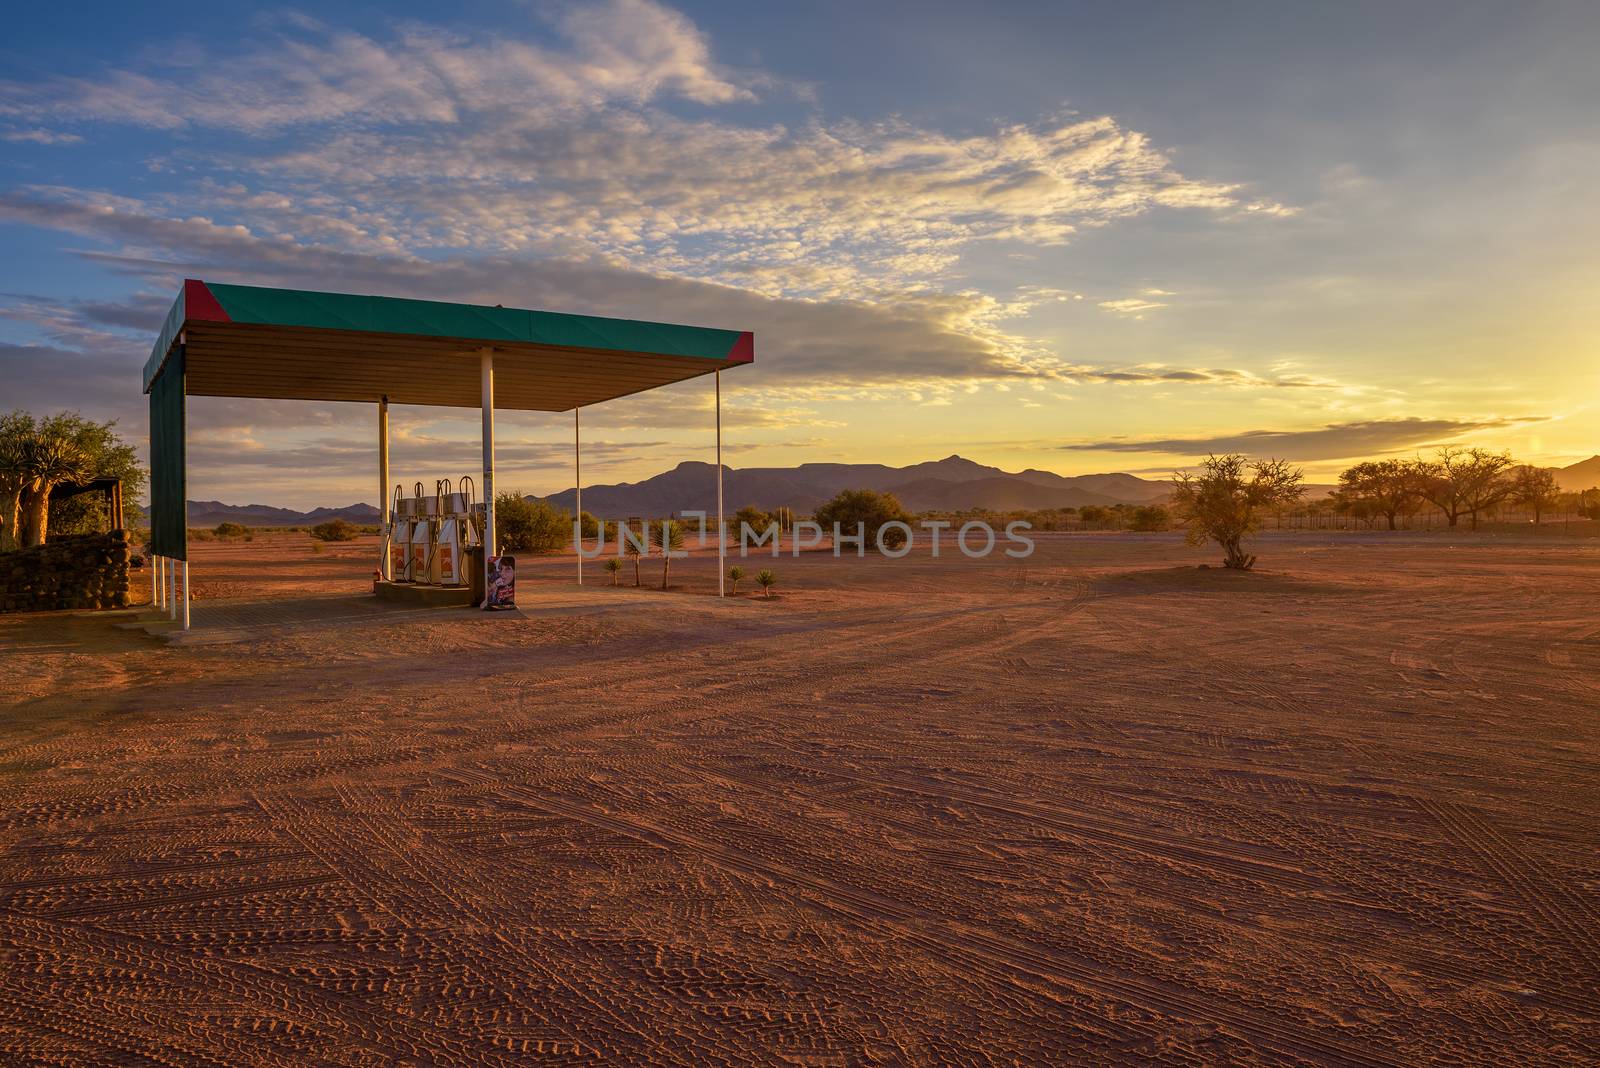 Puma gas station located on a dirt road in the Namib Desert at sunrise by nickfox